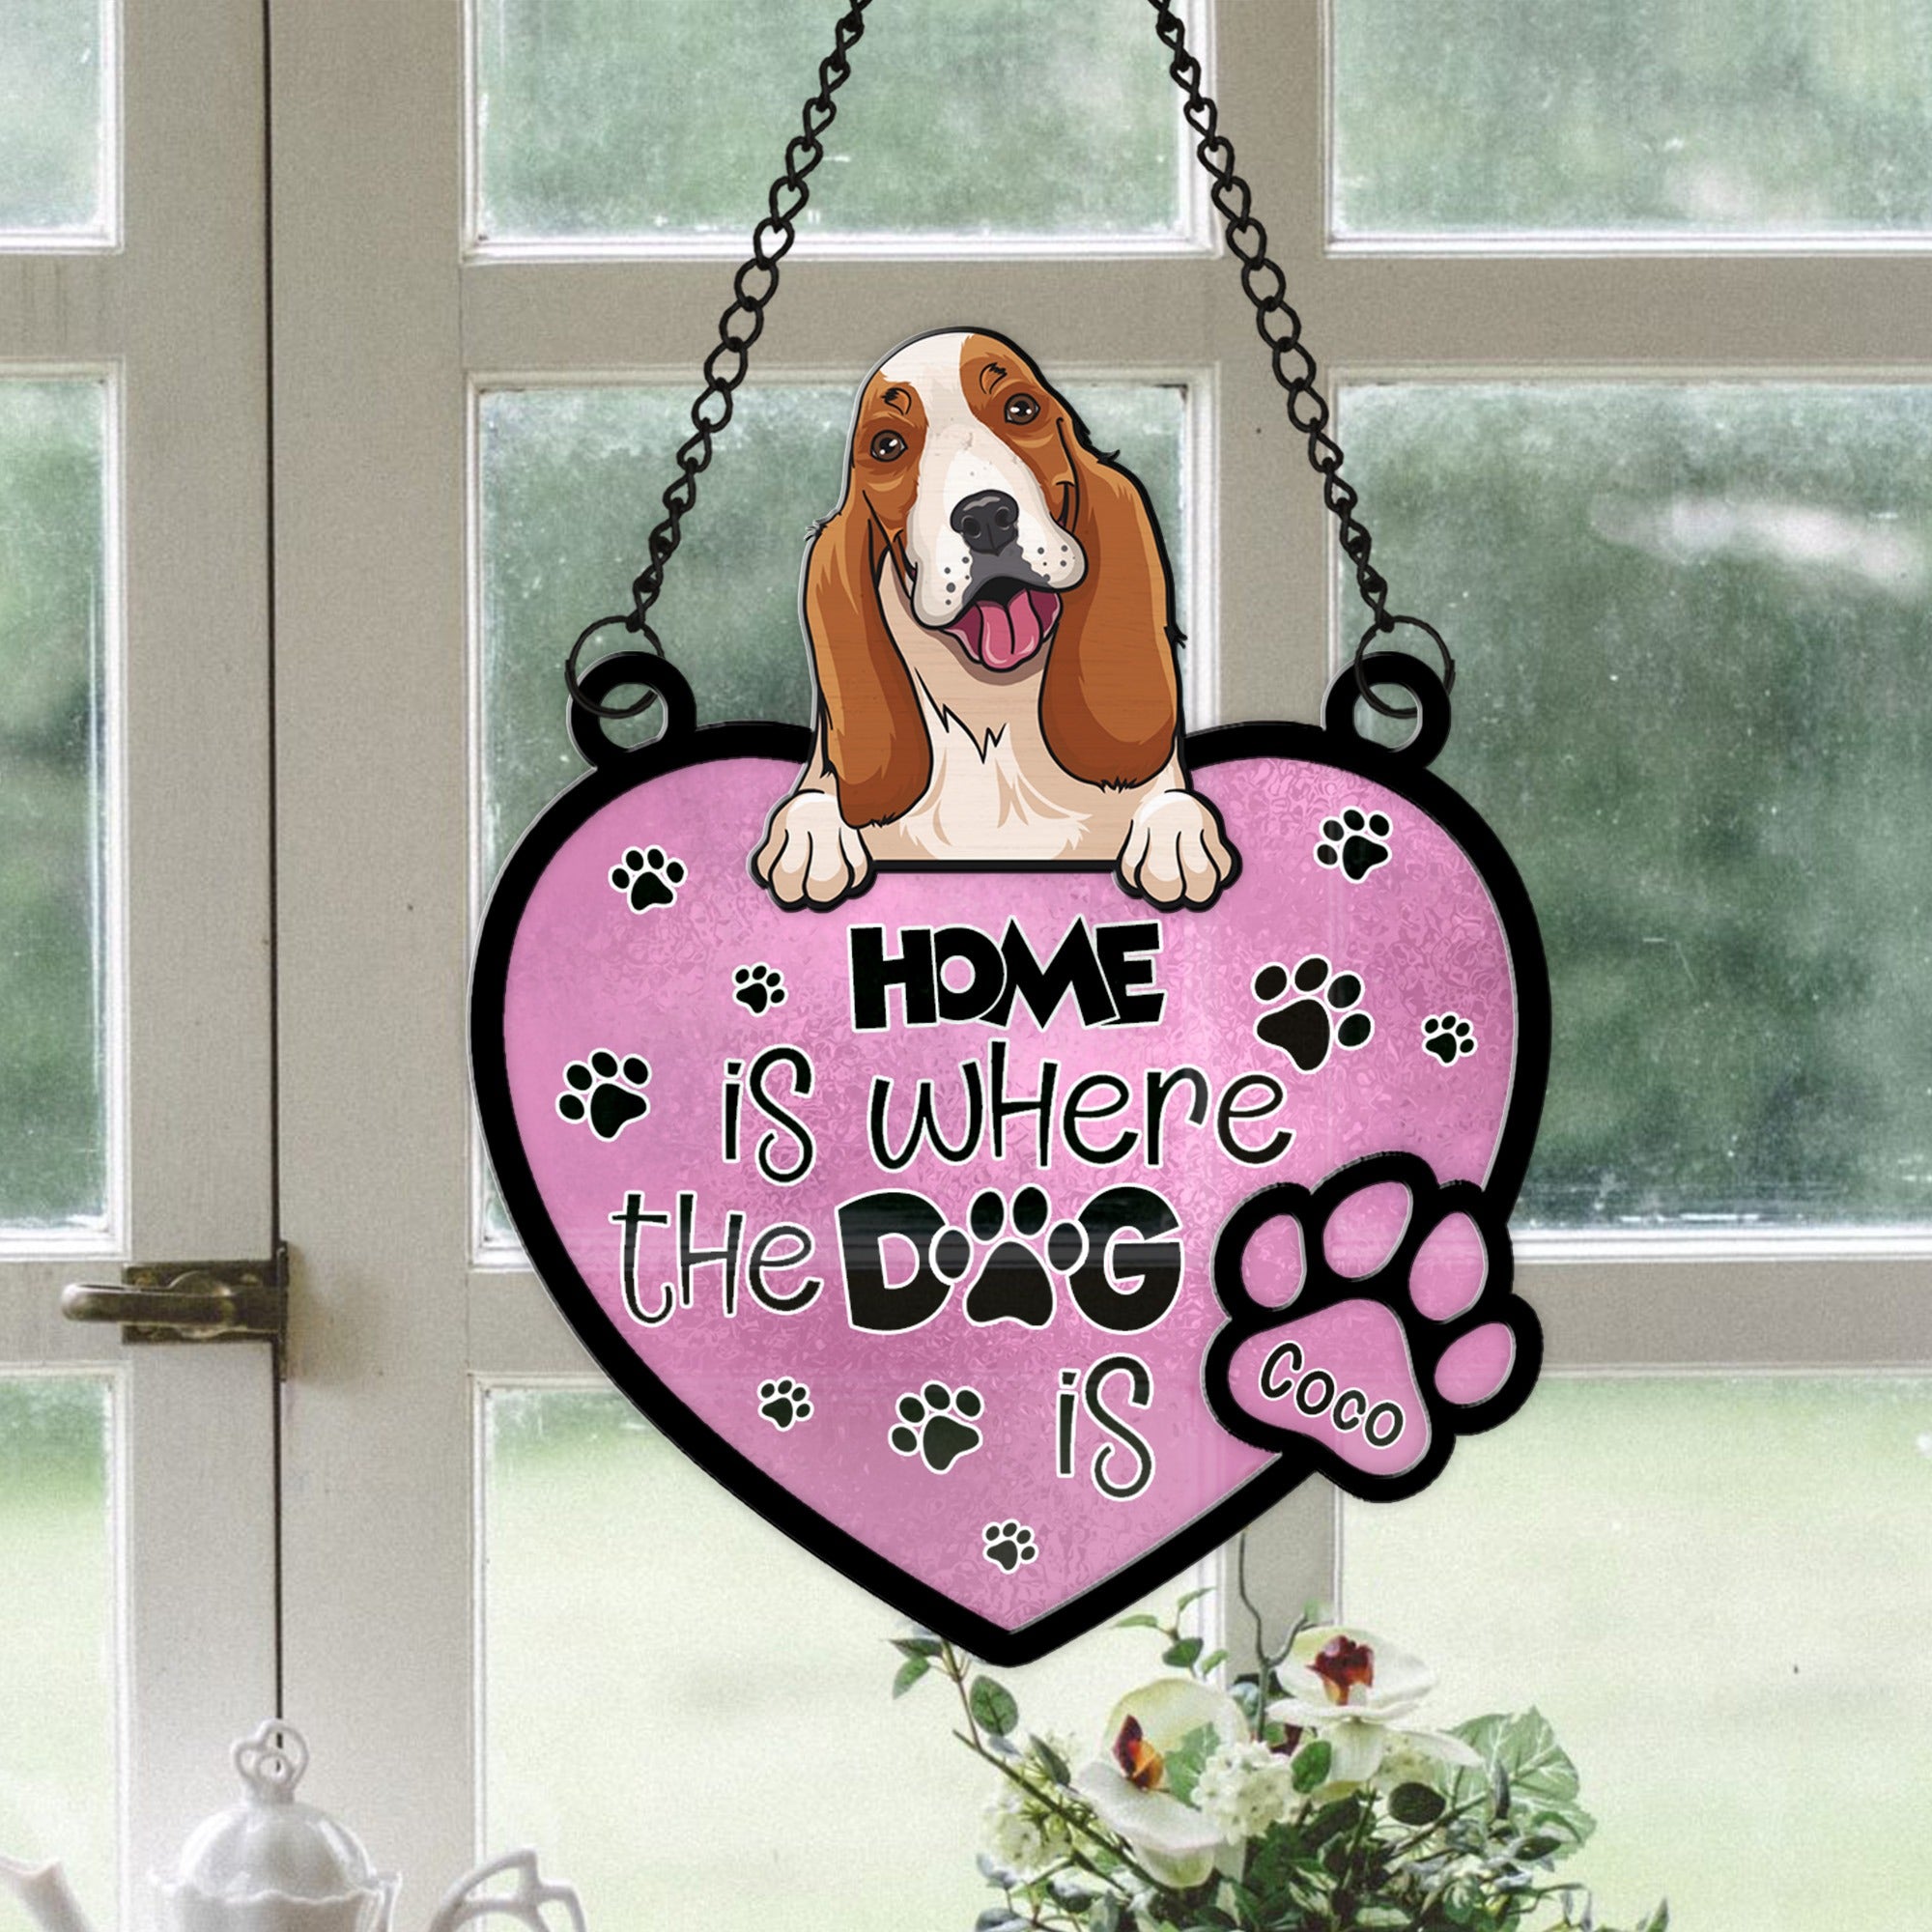 Personalized Funny Dog Home Is Where The Dog Is Hanging Suncatcher Ornament